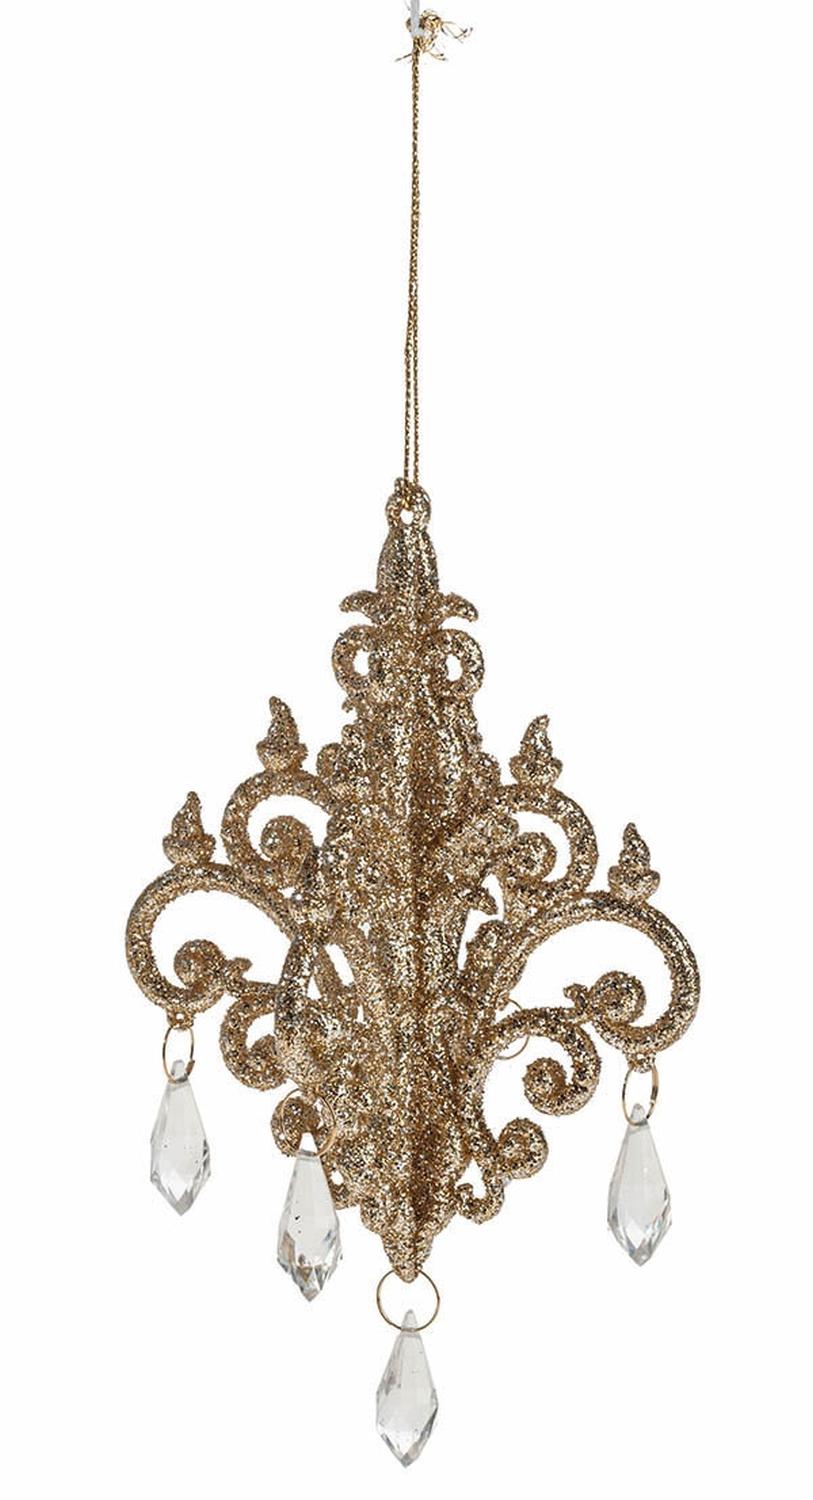 Deco ornament 'Chandelier' made of acrylic material, 14 cm, champagne-camelie